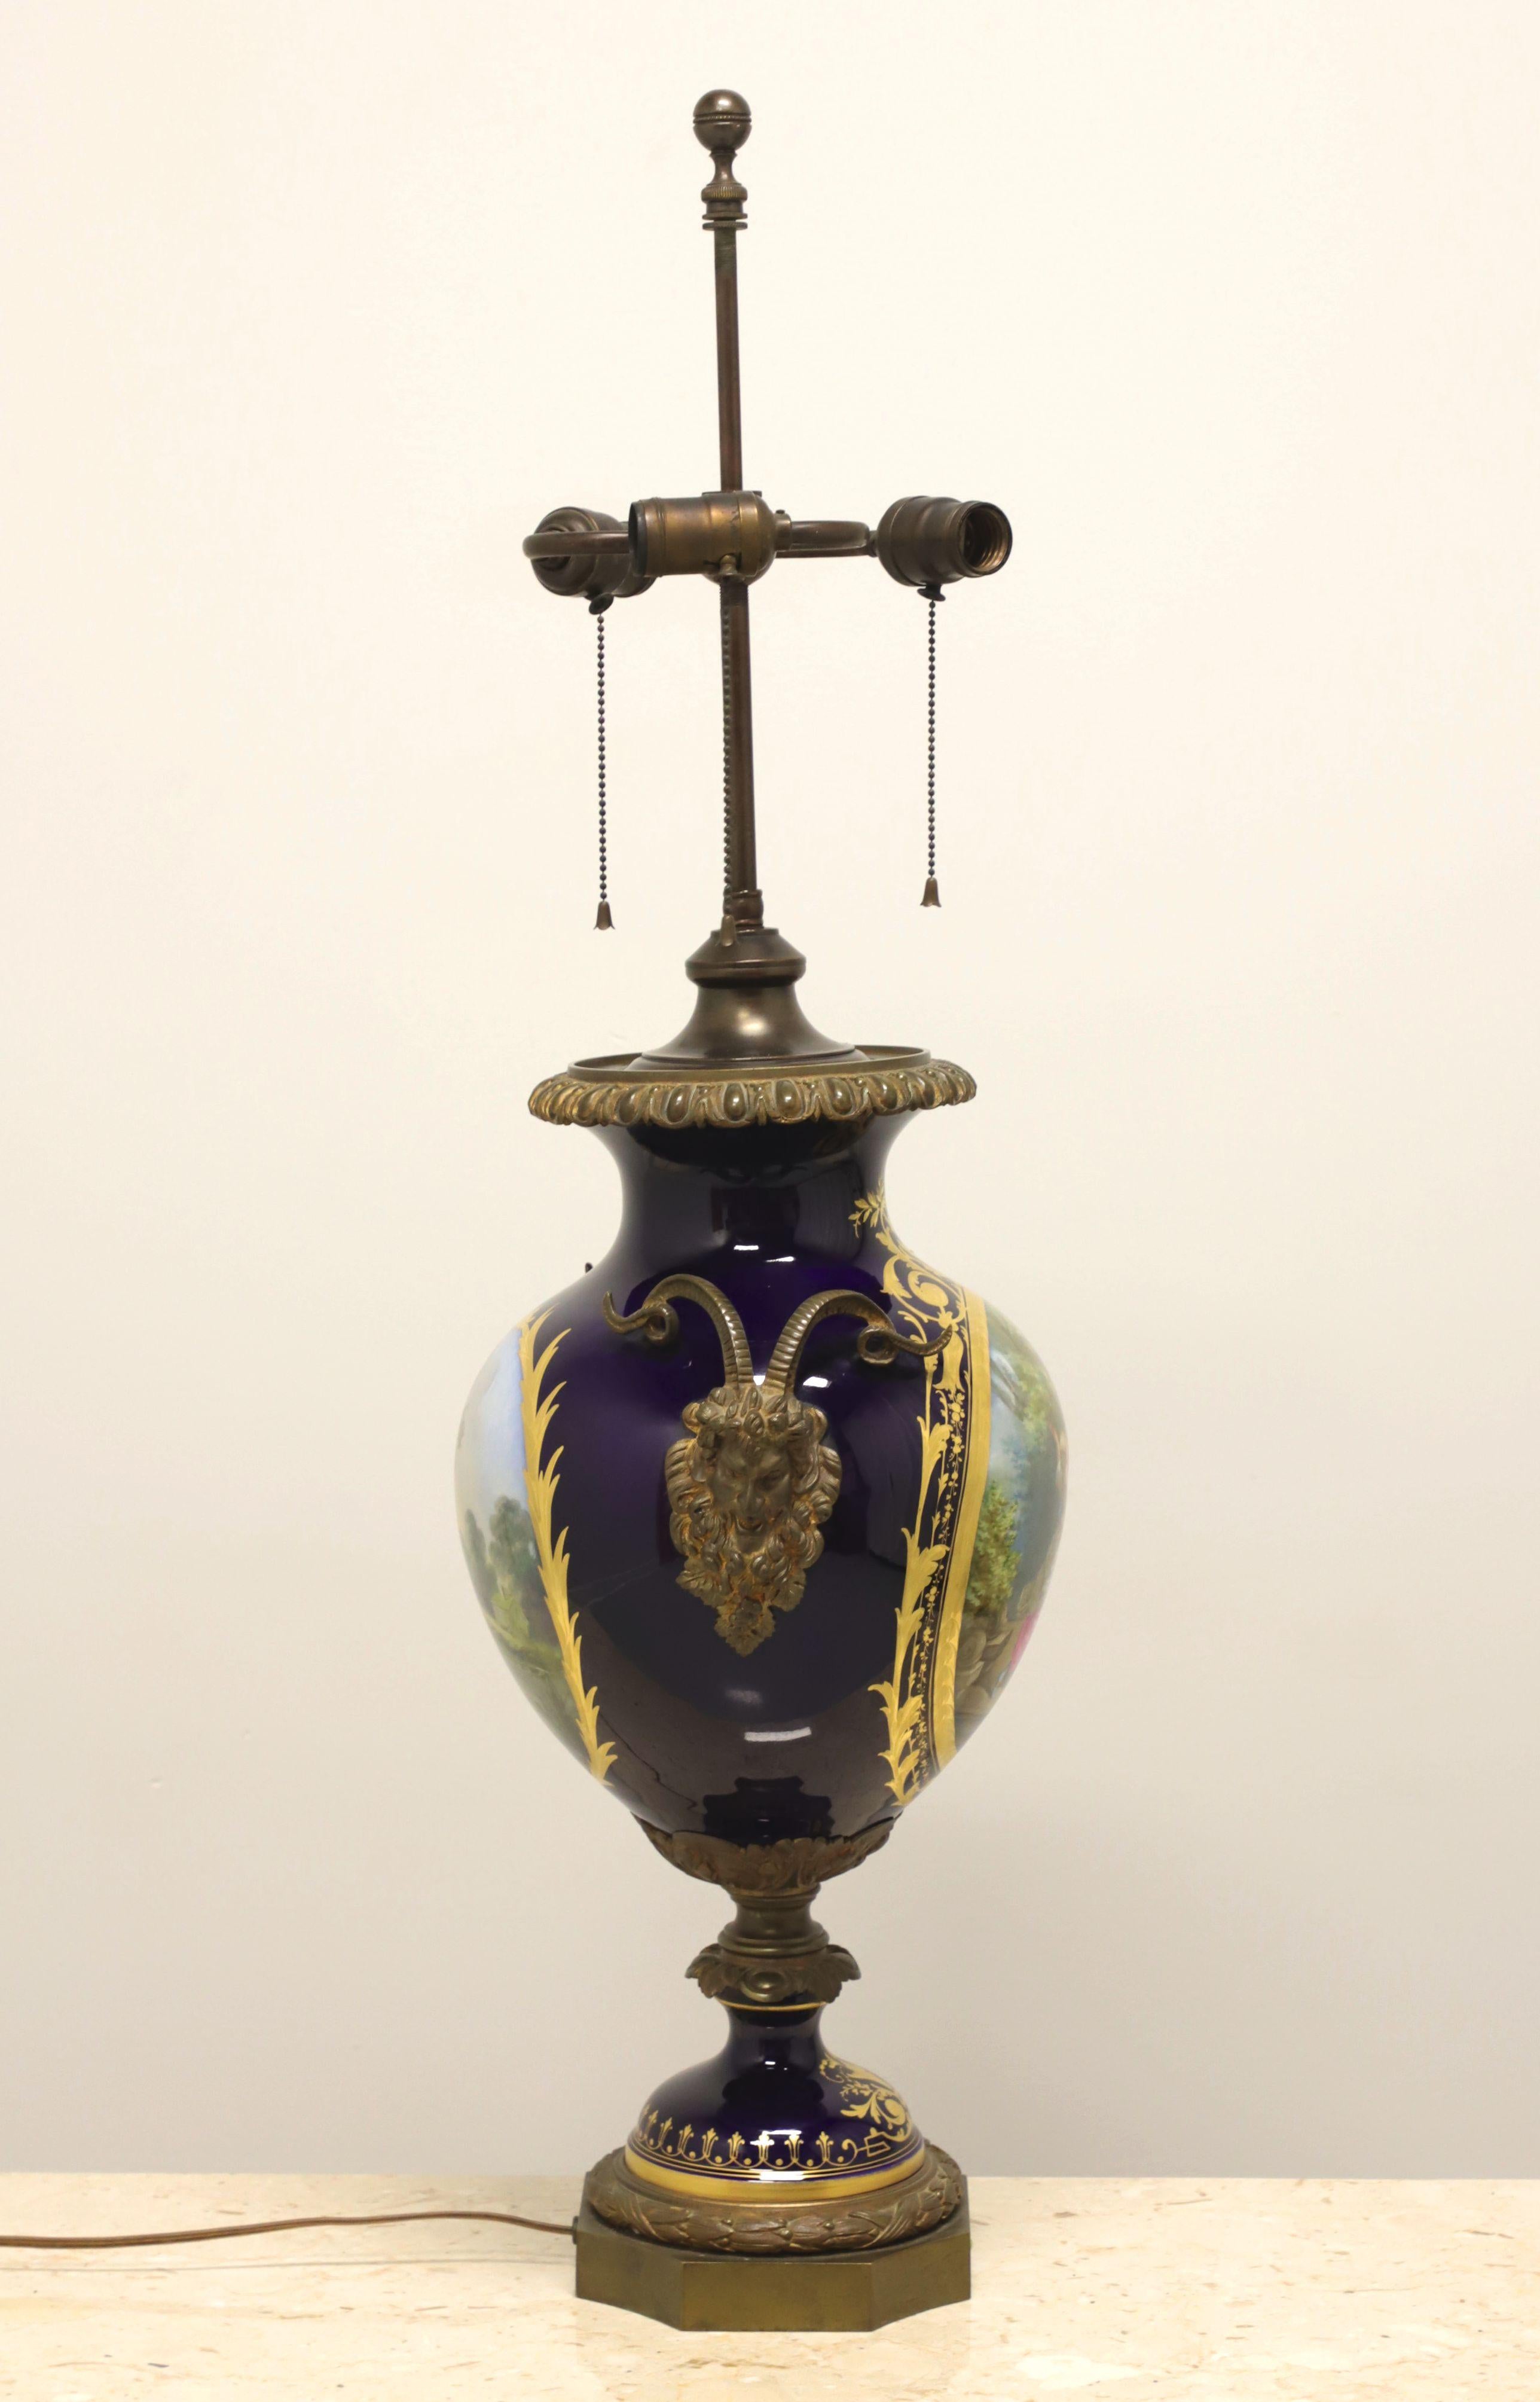 French Provincial 19th Century French Sevres Porcelain with Bronze Ormolu Mounted as a Table Lamp For Sale